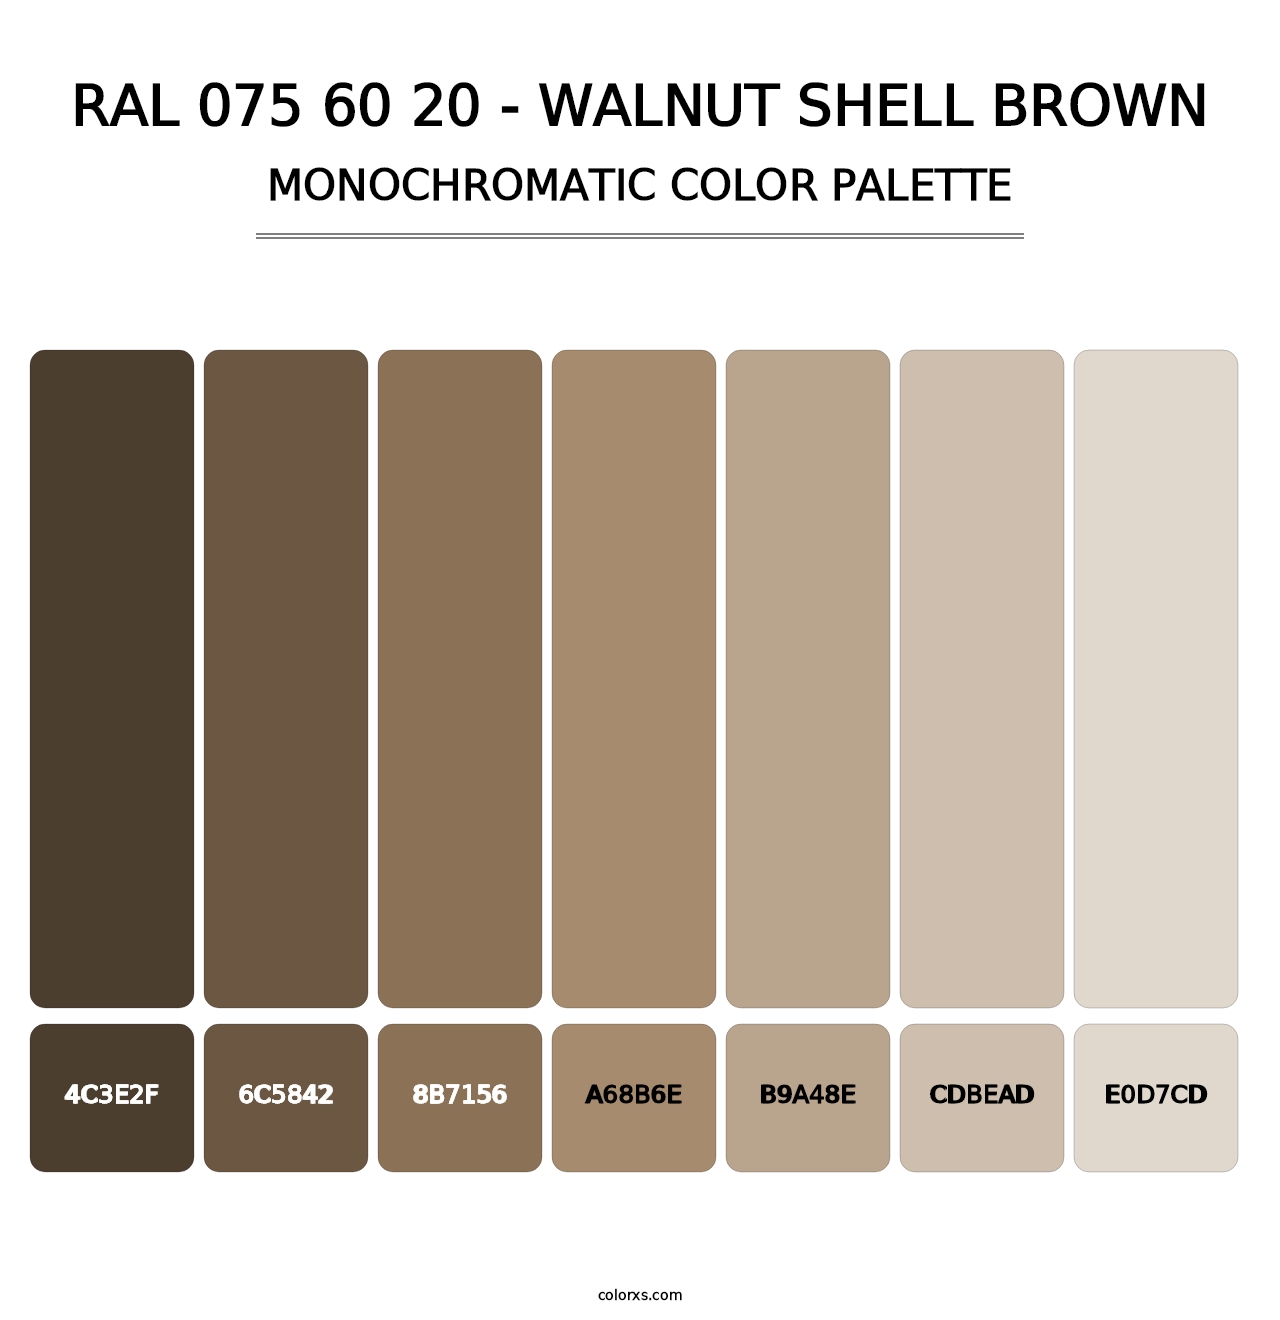 RAL 075 60 20 - Walnut Shell Brown - Monochromatic Color Palette